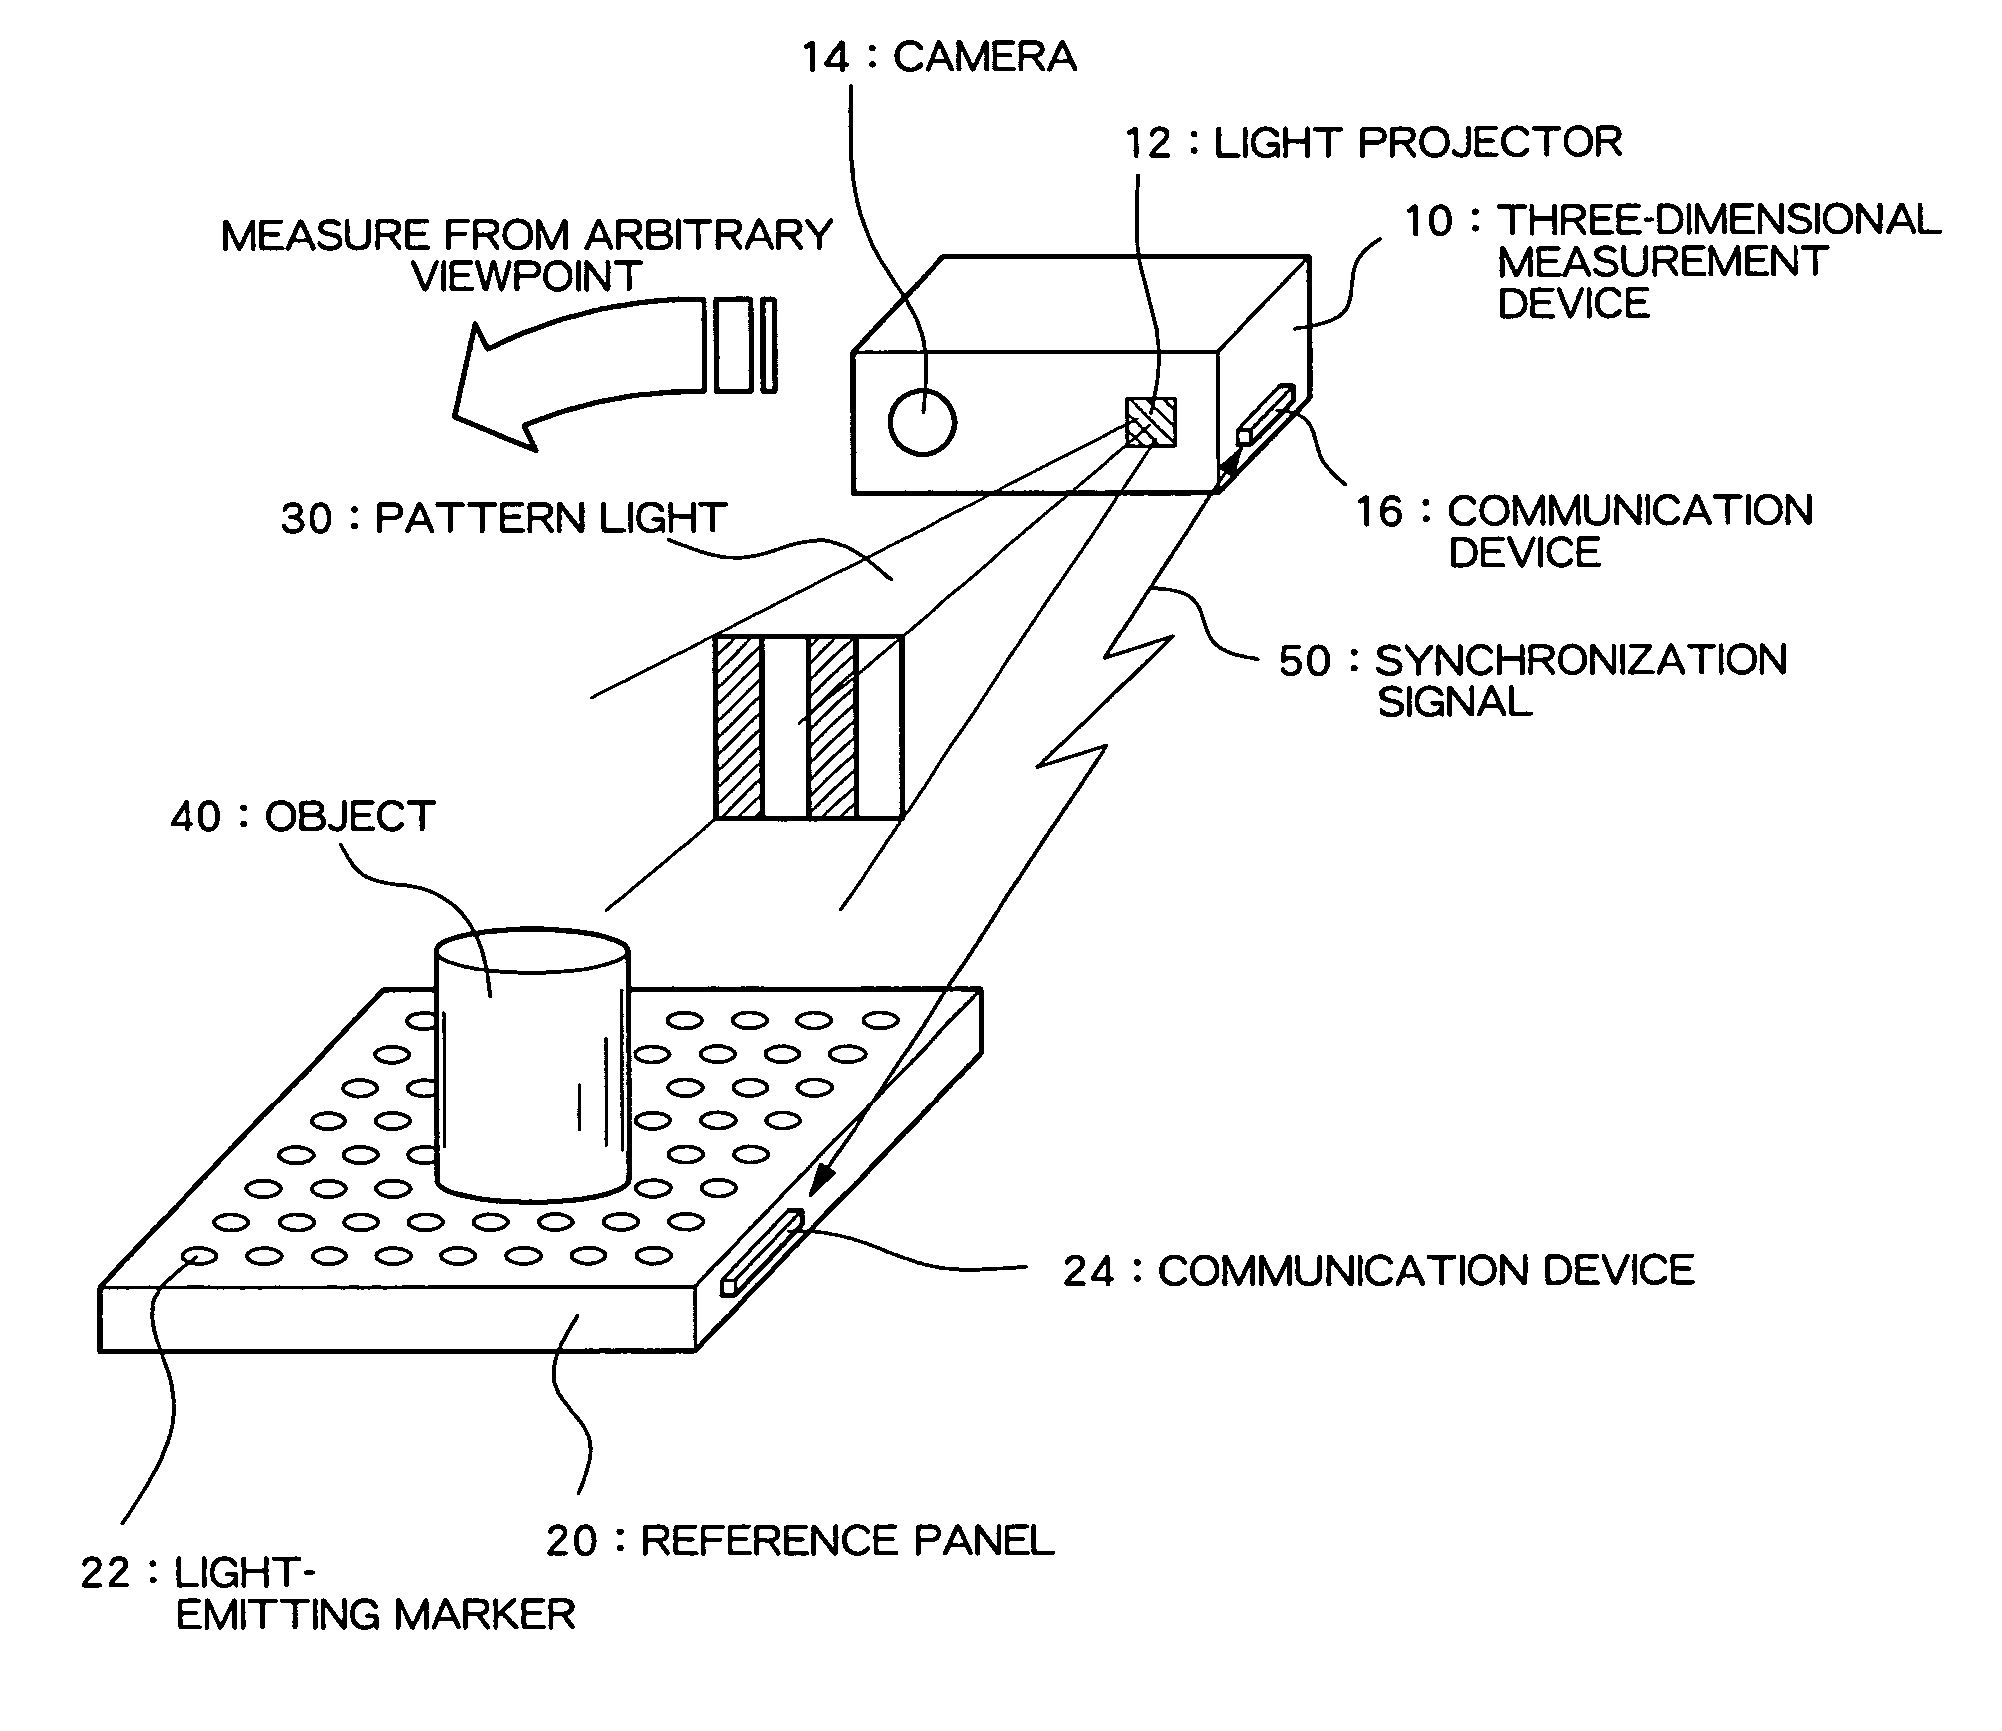 Camera calibration system and three-dimensional measuring system